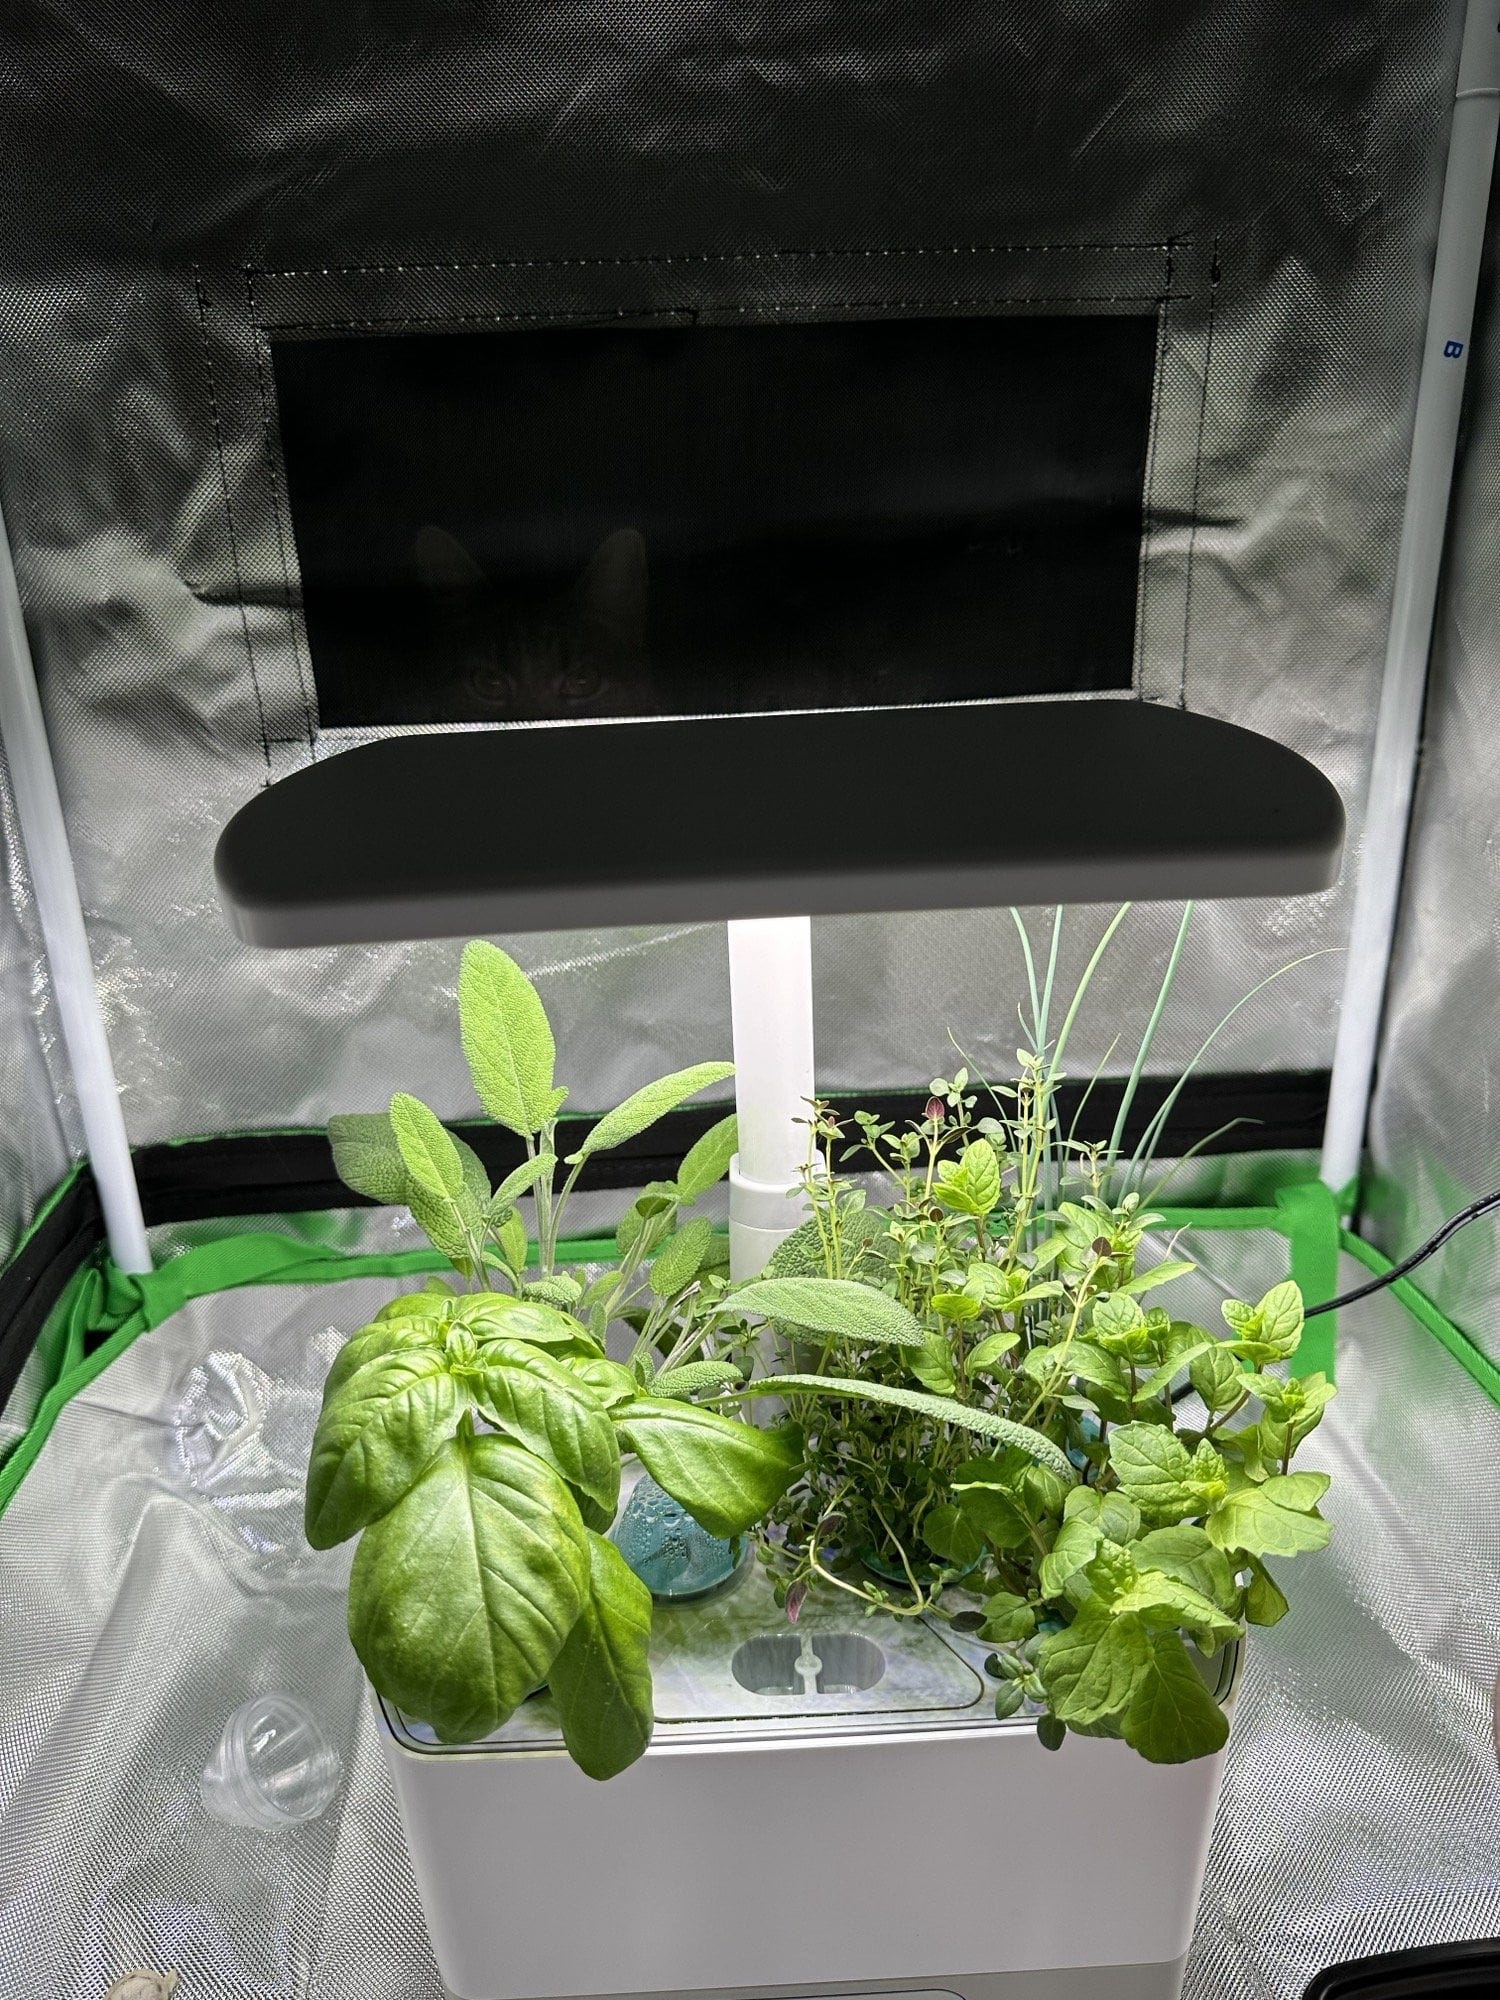 5 Compelling Reasons to Invest in a Protective Tent for Your Aerogarden-Hydroponics Setup - Optimal conditions provided by a protective tent for plant growth